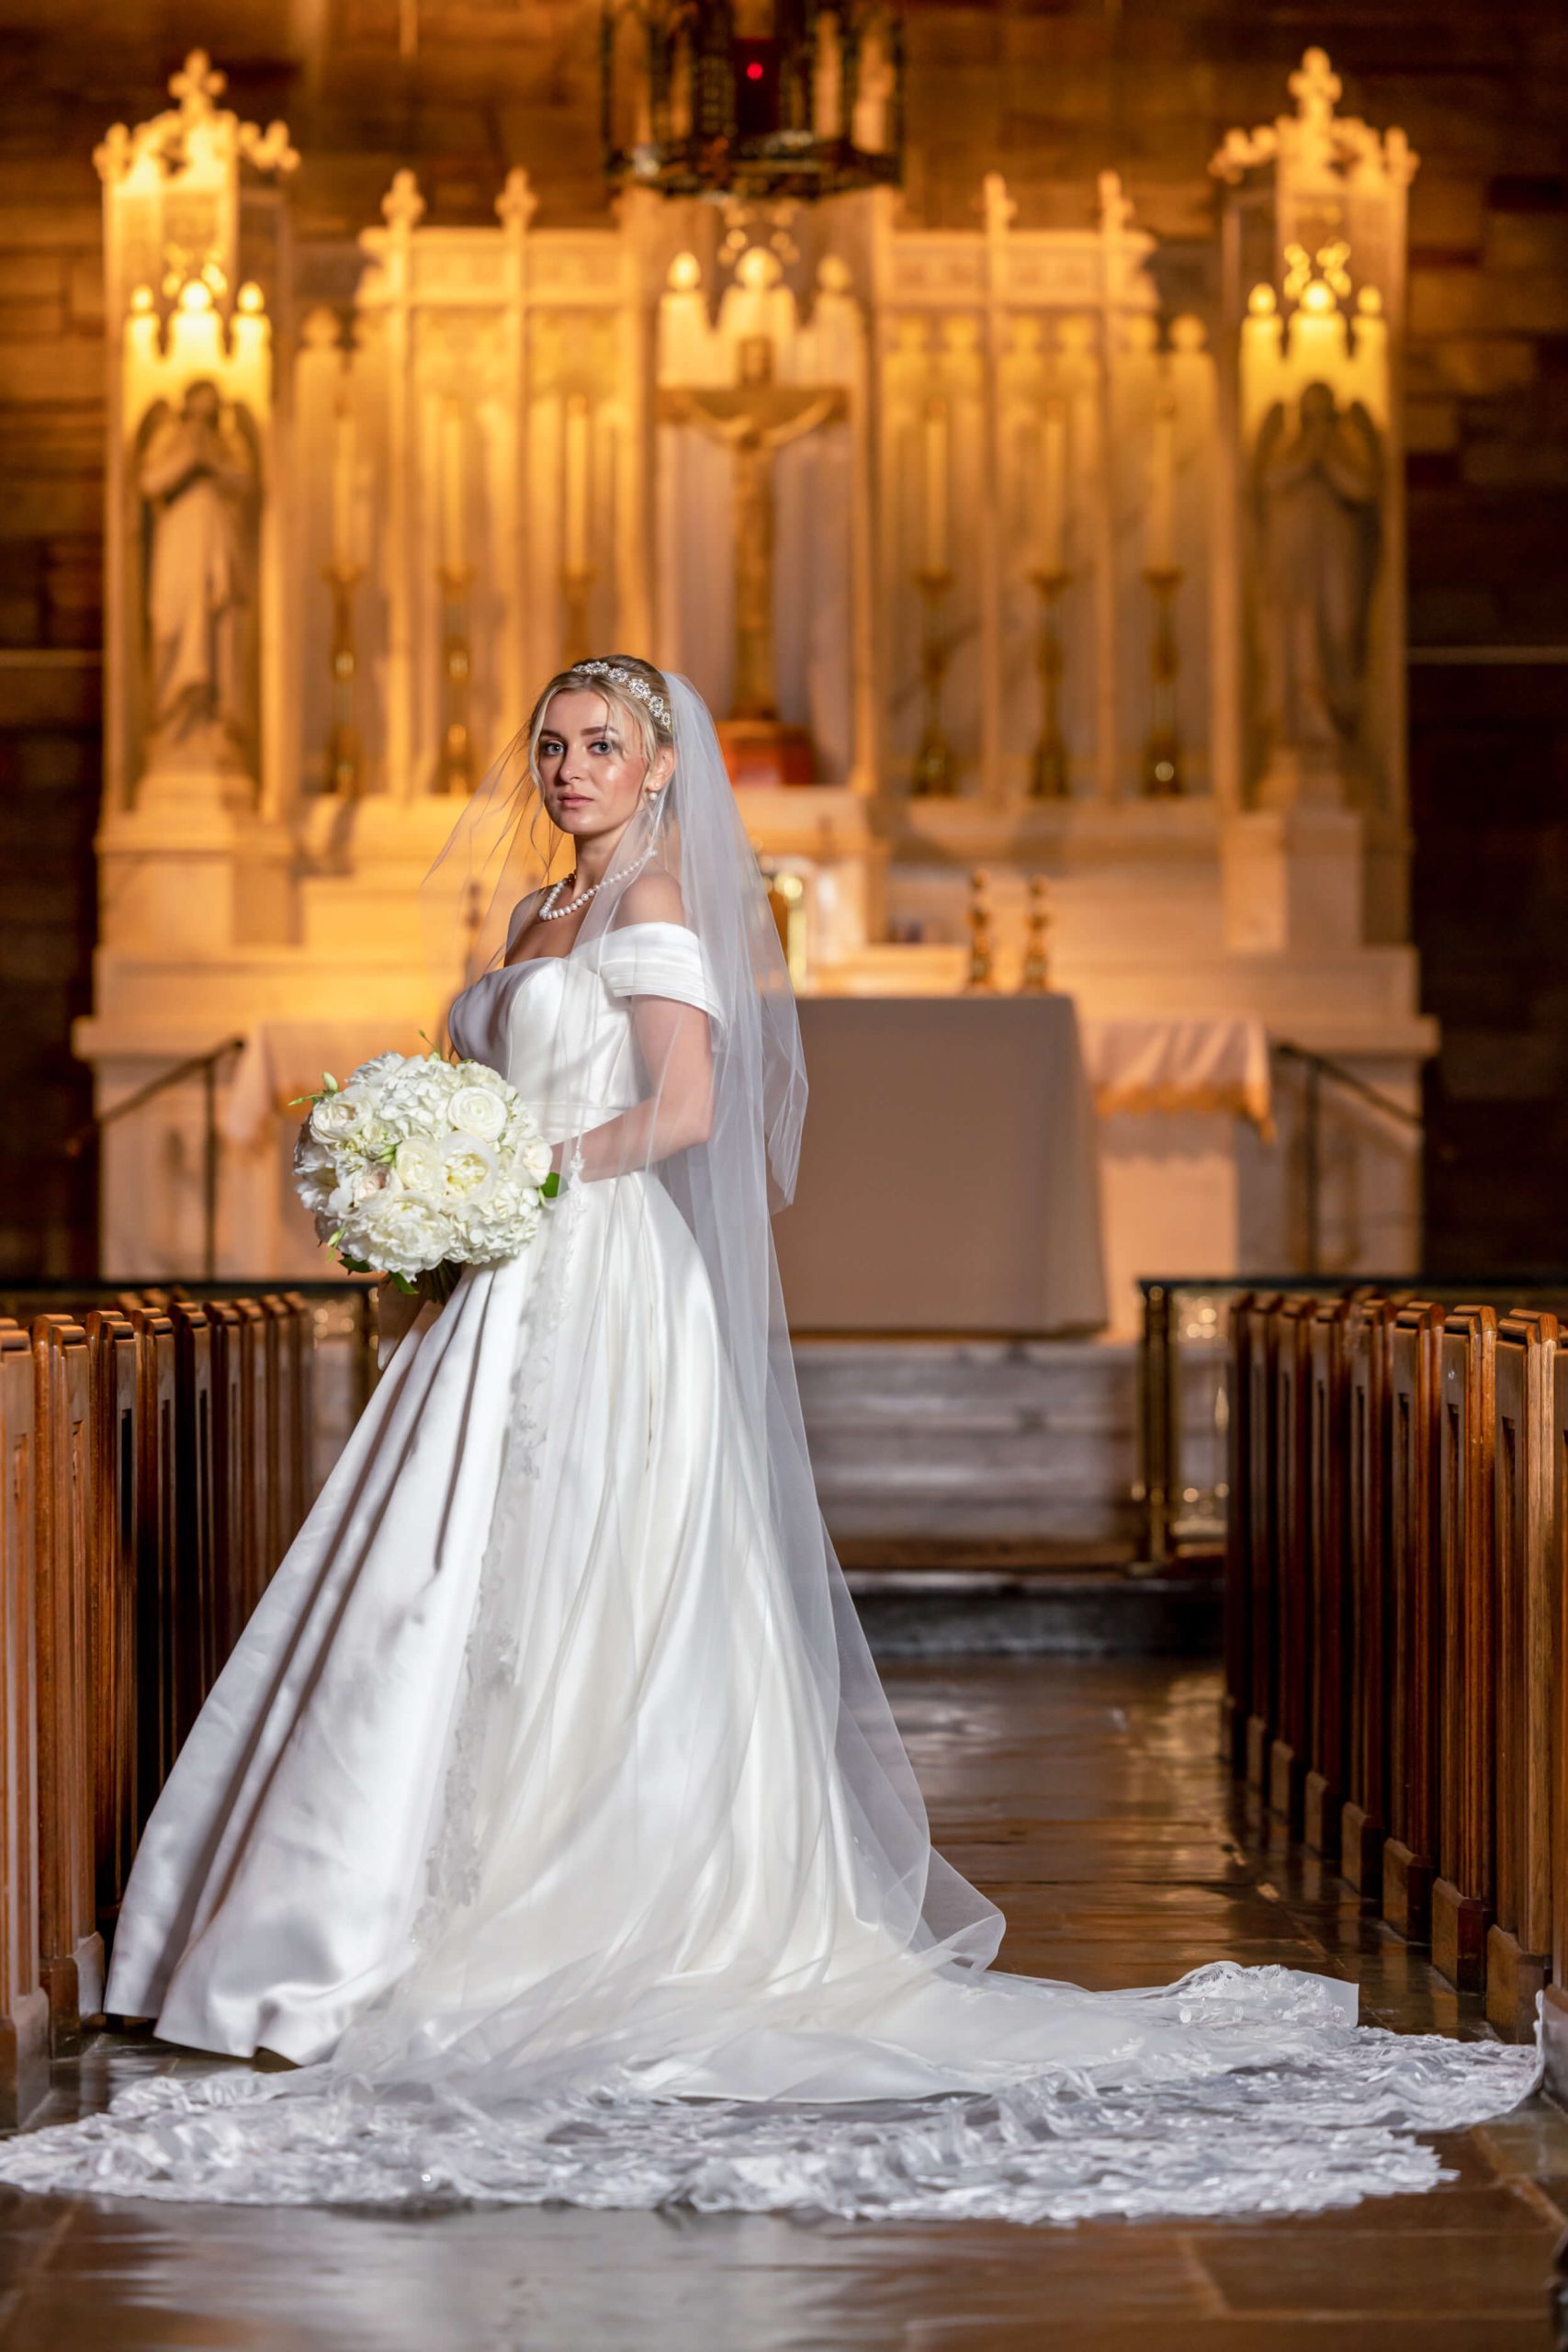 bride with white flower bouquet at altar in catholic church